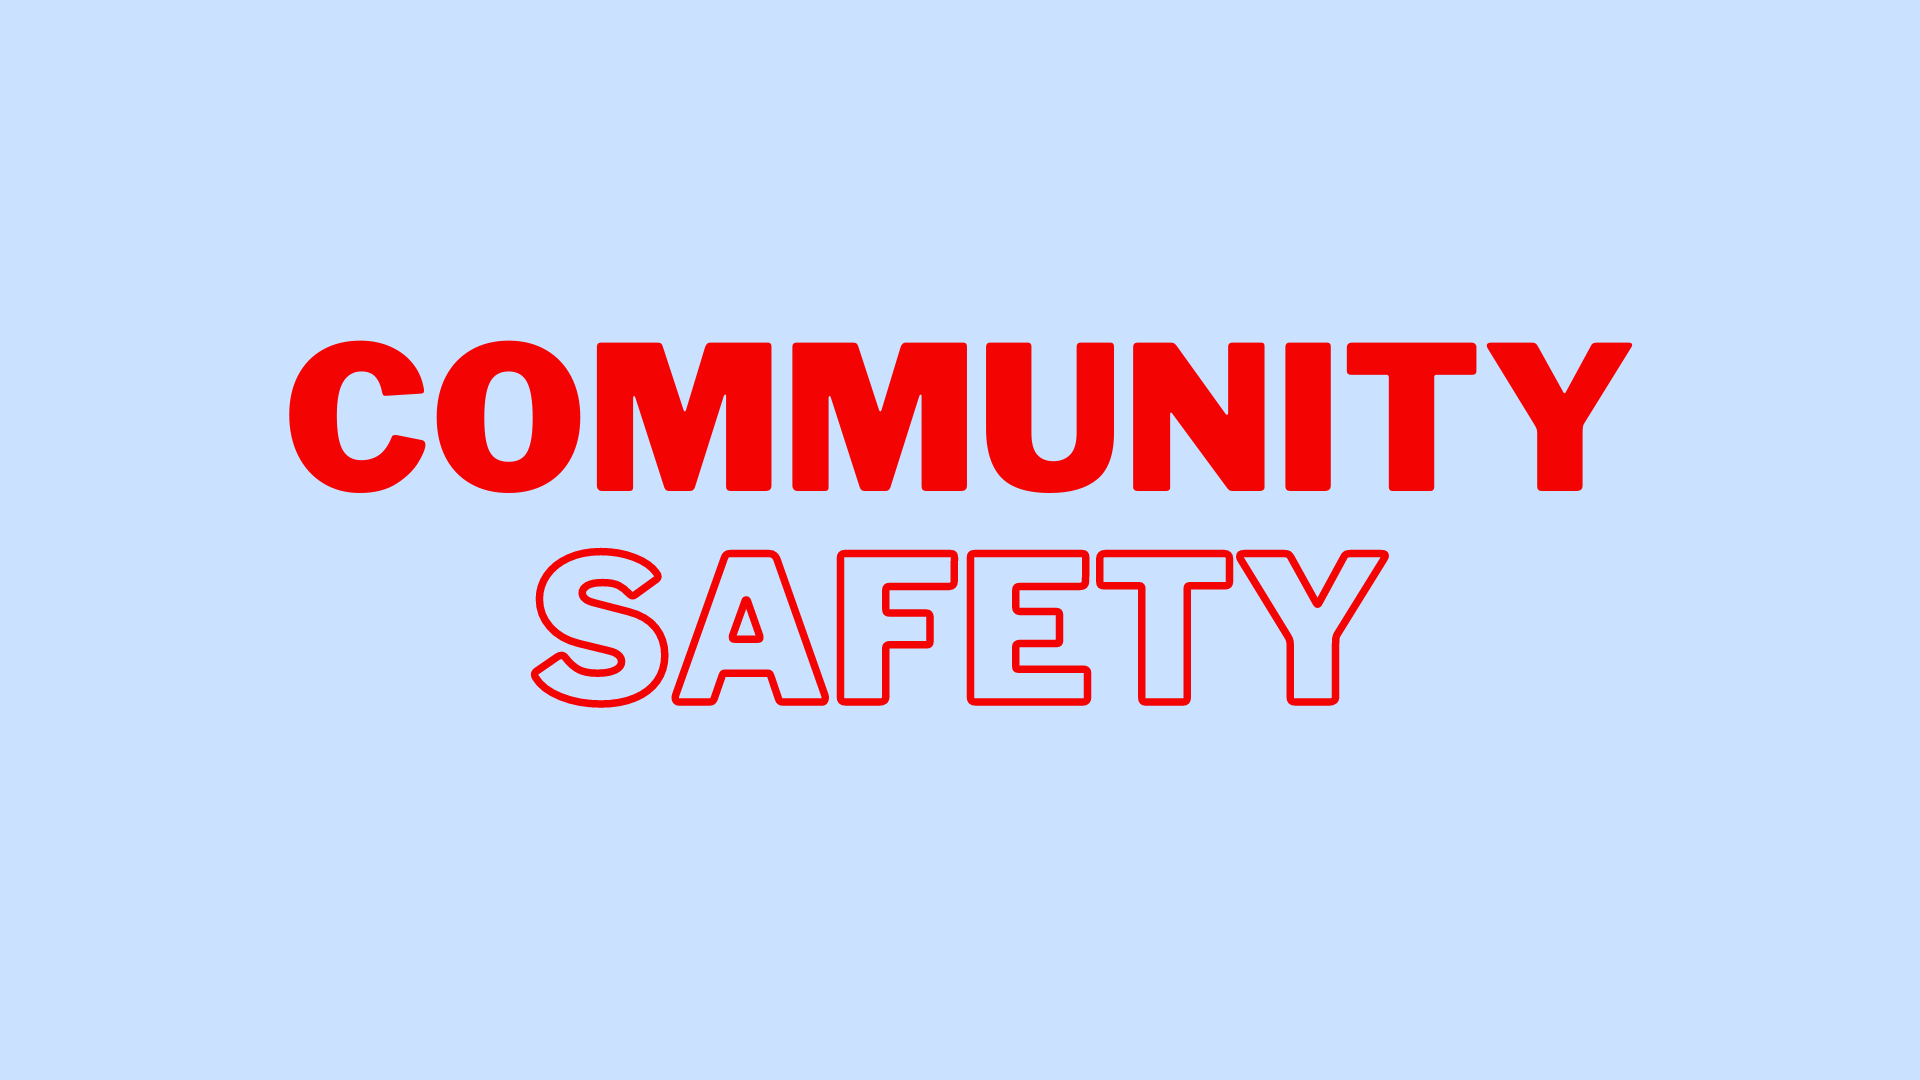 Community Safety text